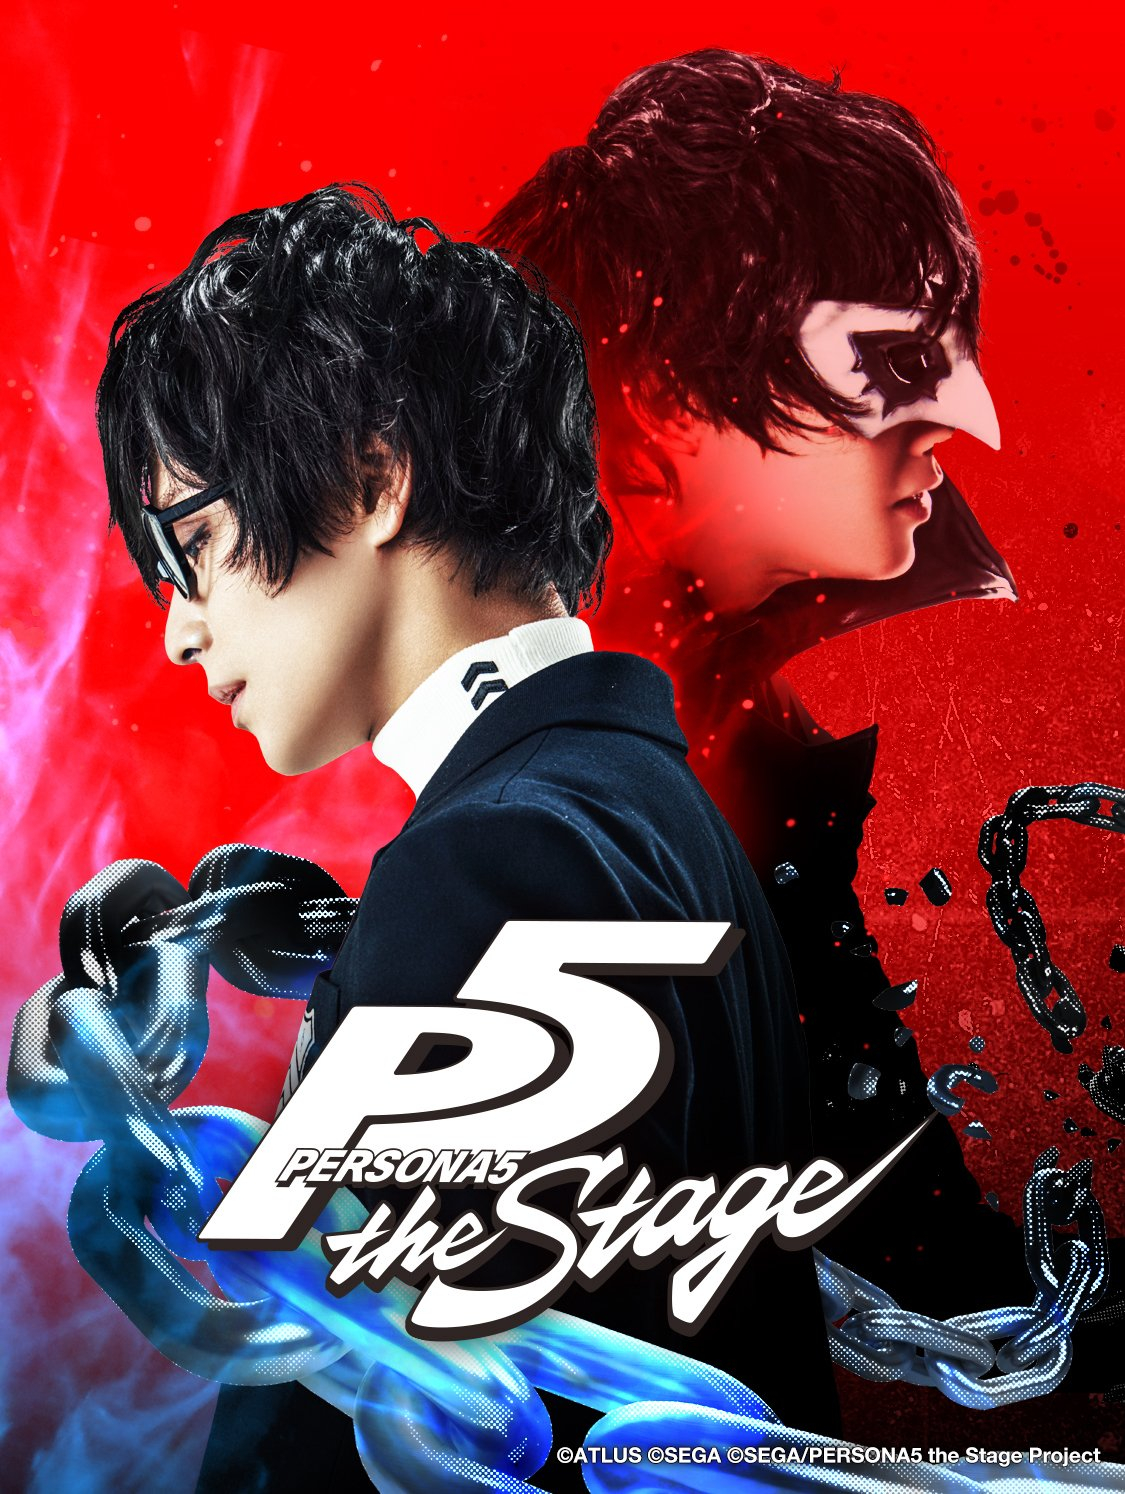 Persona 5: The Stage